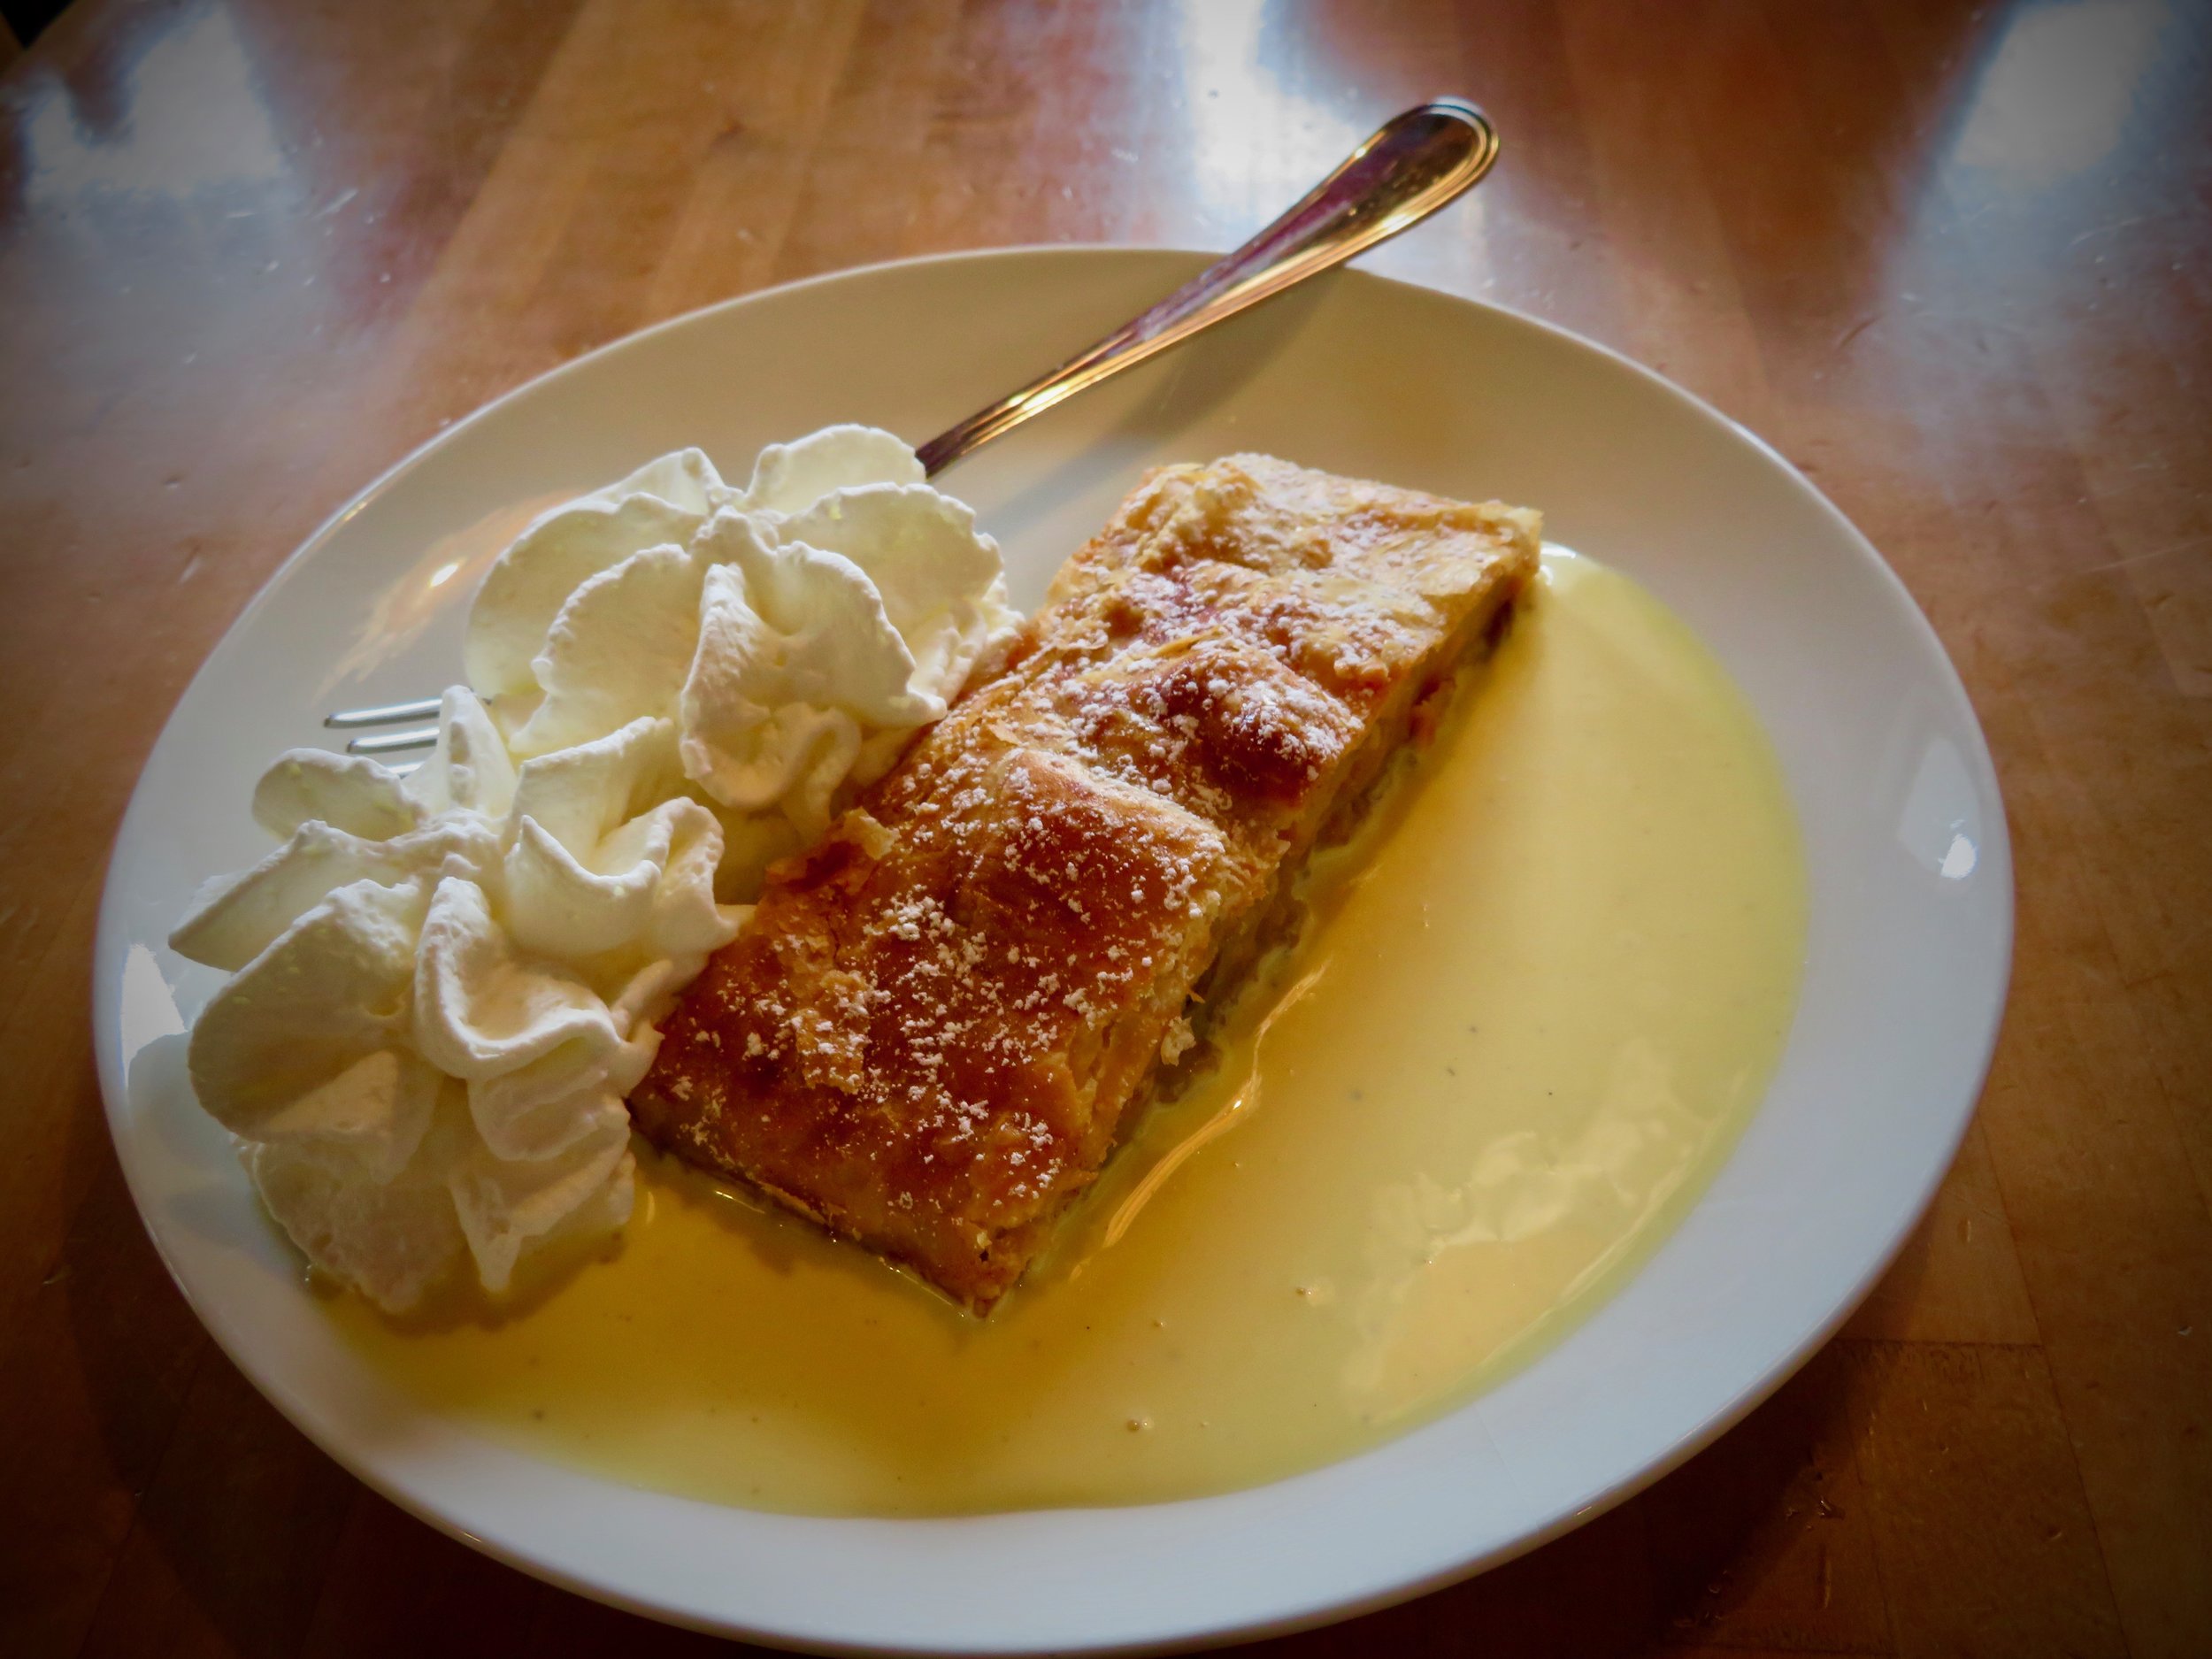 This is it! The best strudel in the Dolomites!